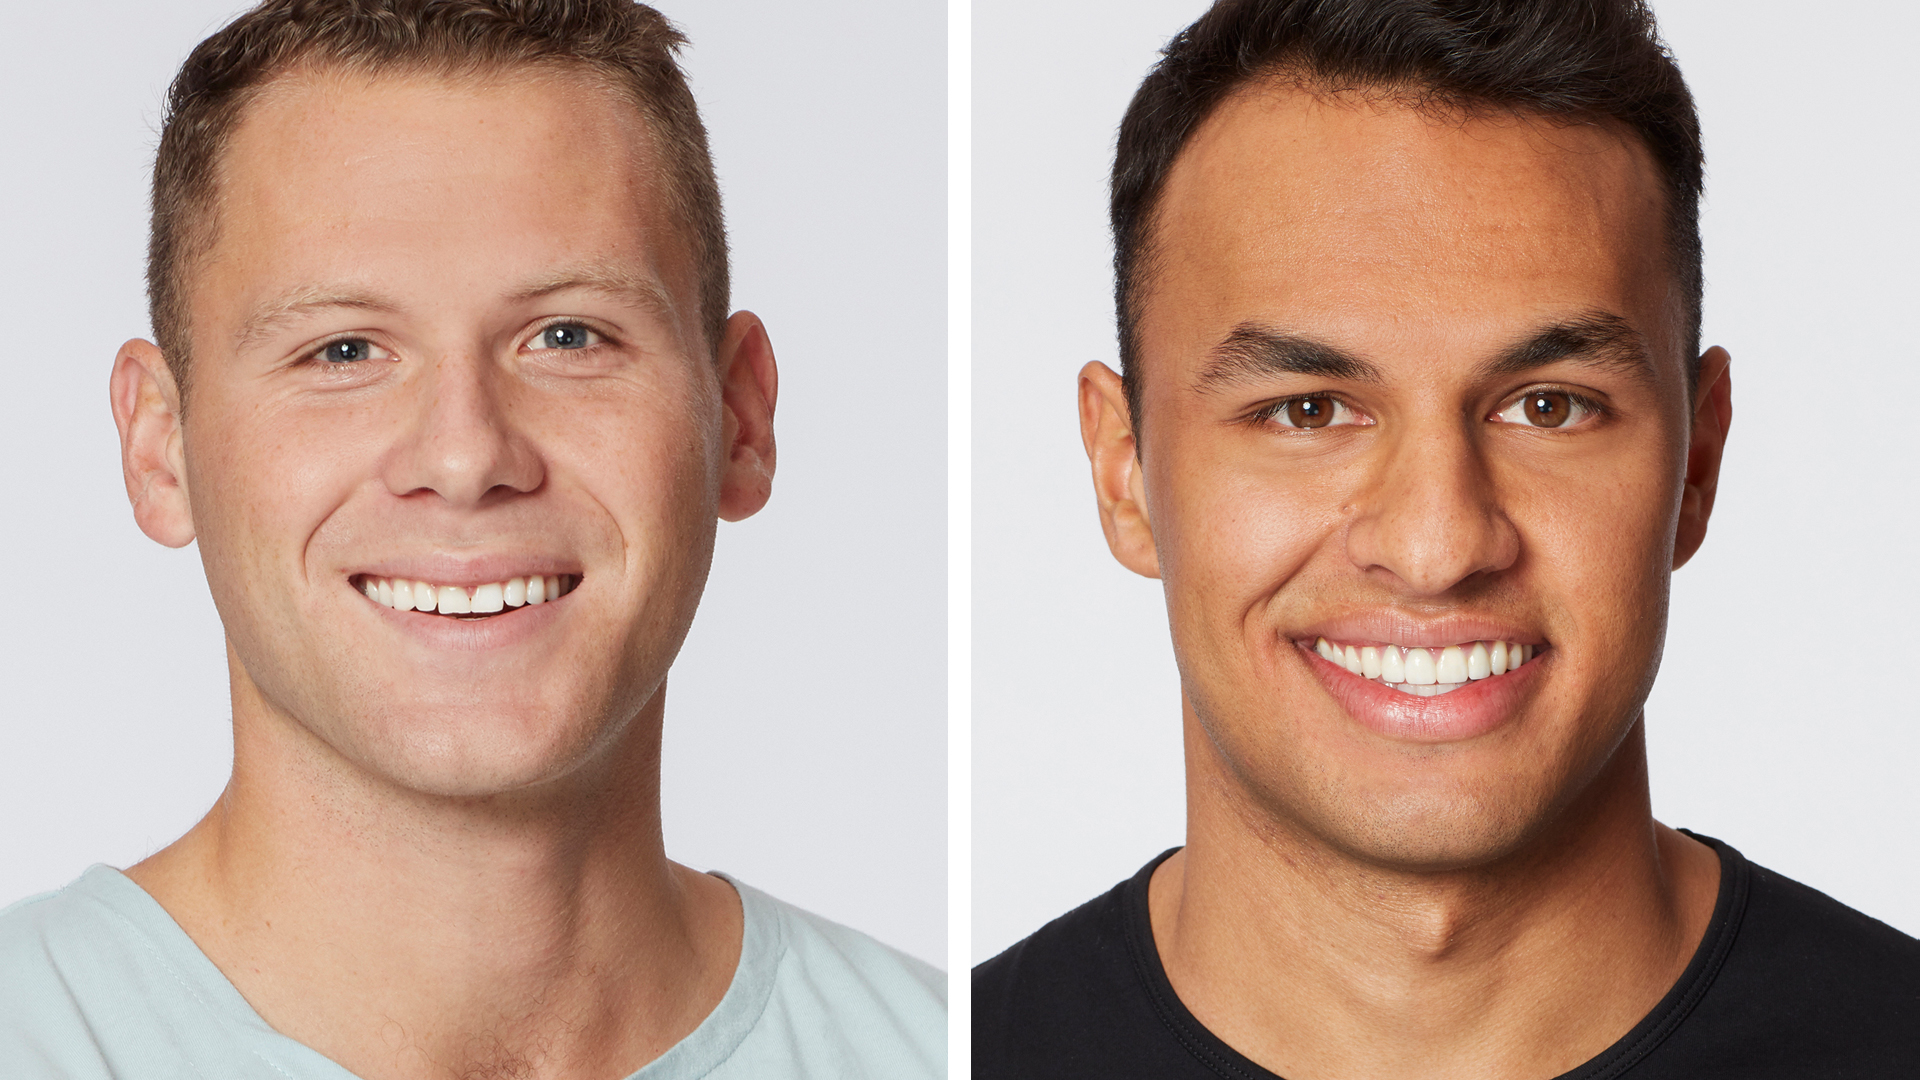 Headshots of Cody Menk and Aaron Clancy from ‘The Bachelorette’ Season 17